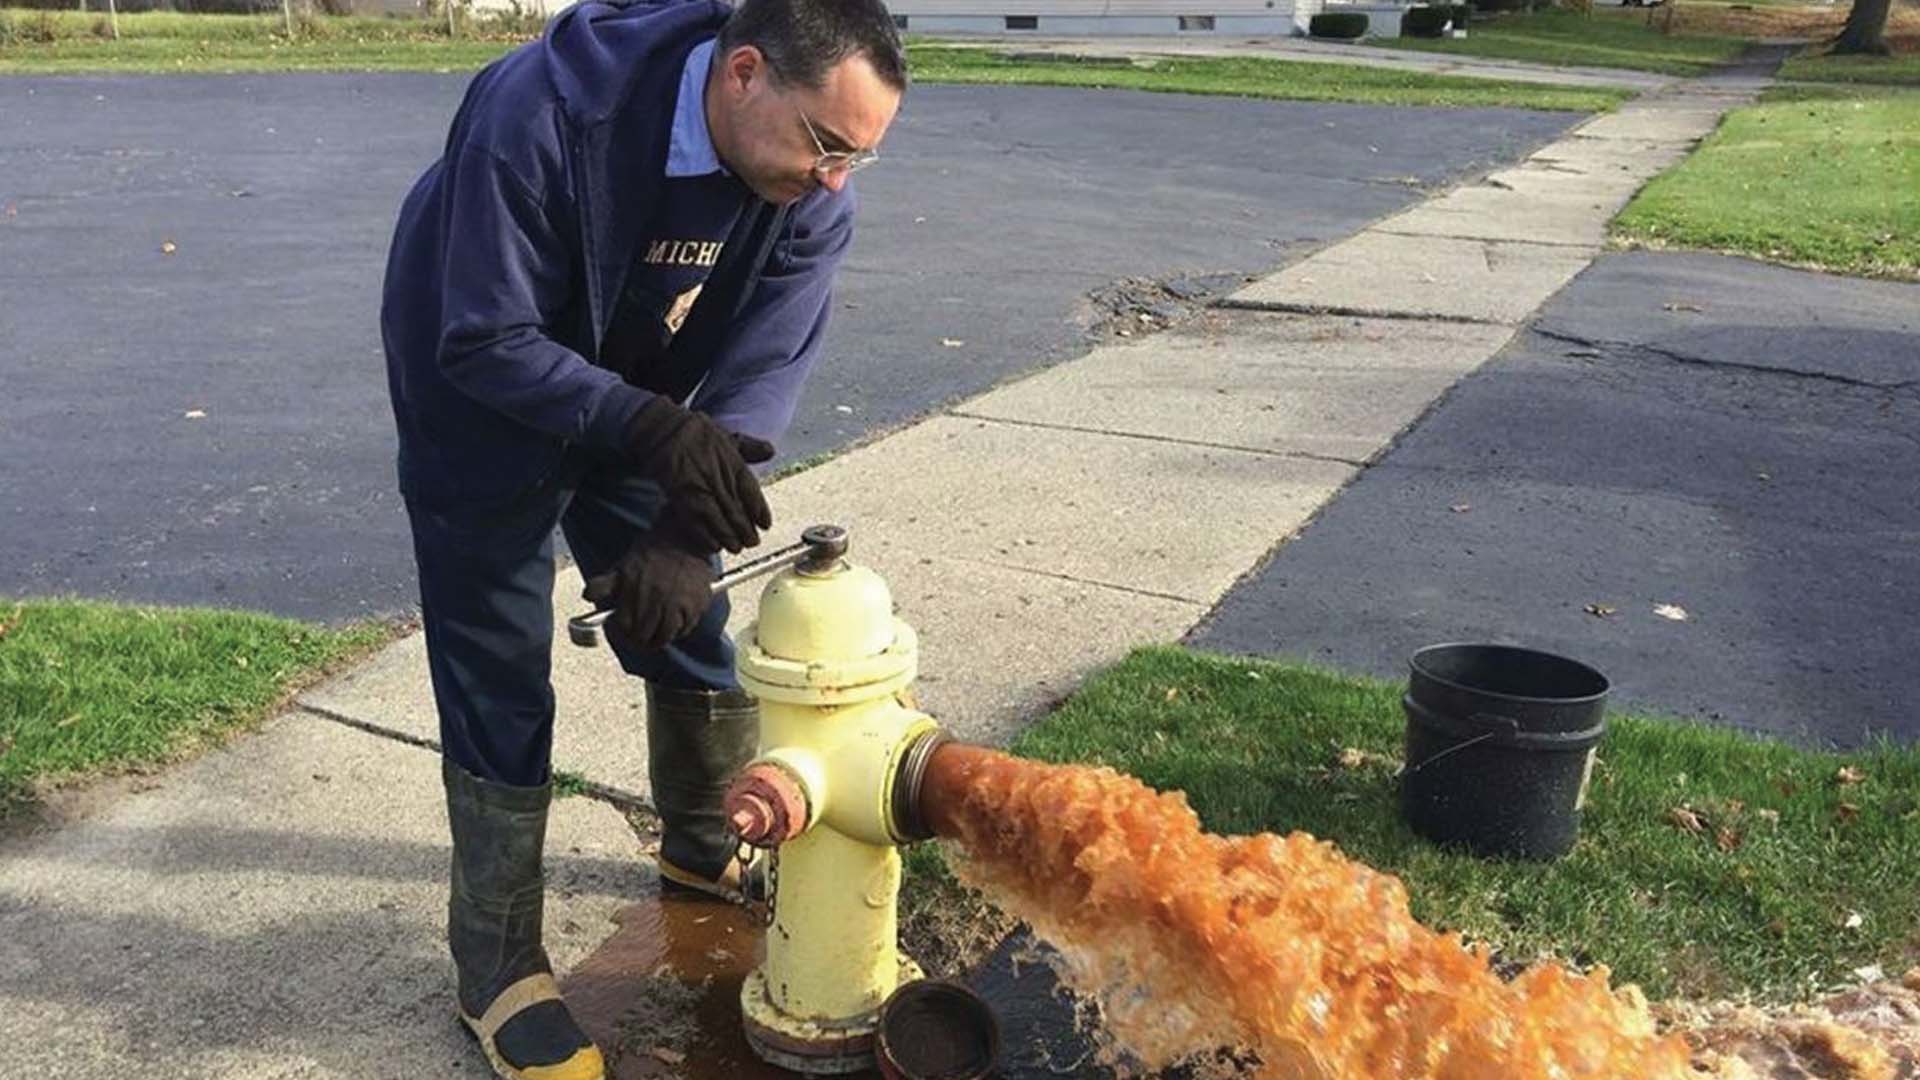 Toxic water from a hydrant in Flint, Michigan; Photo Credit: CNN